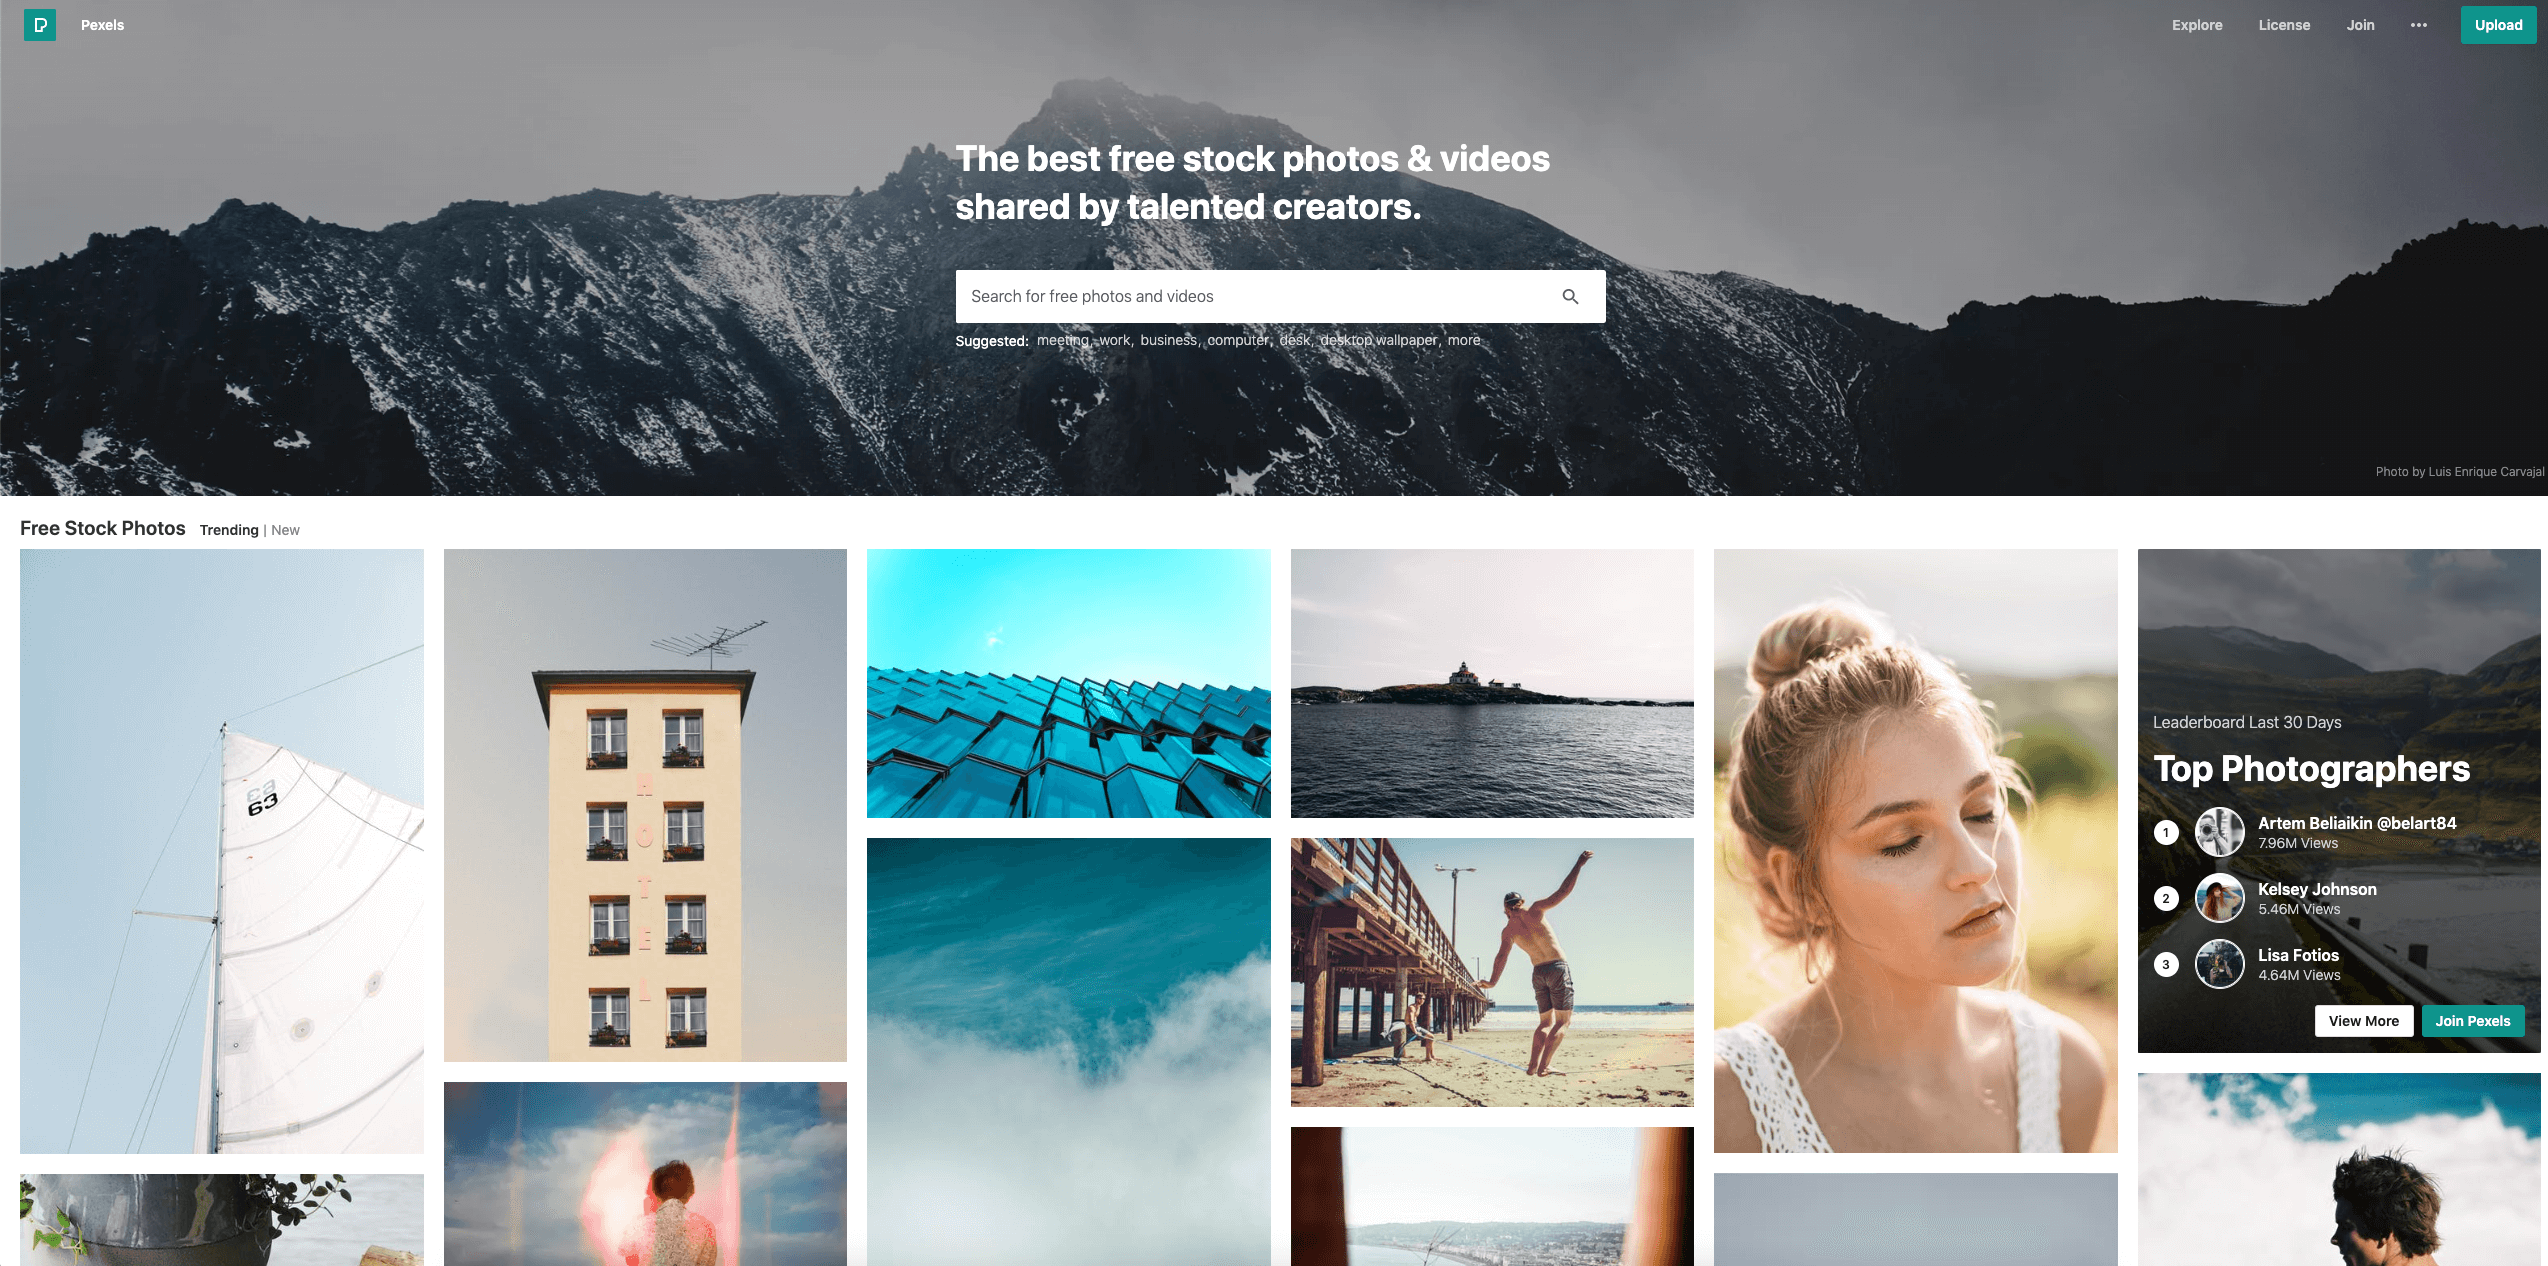 Pexels - one of the best stock image websites